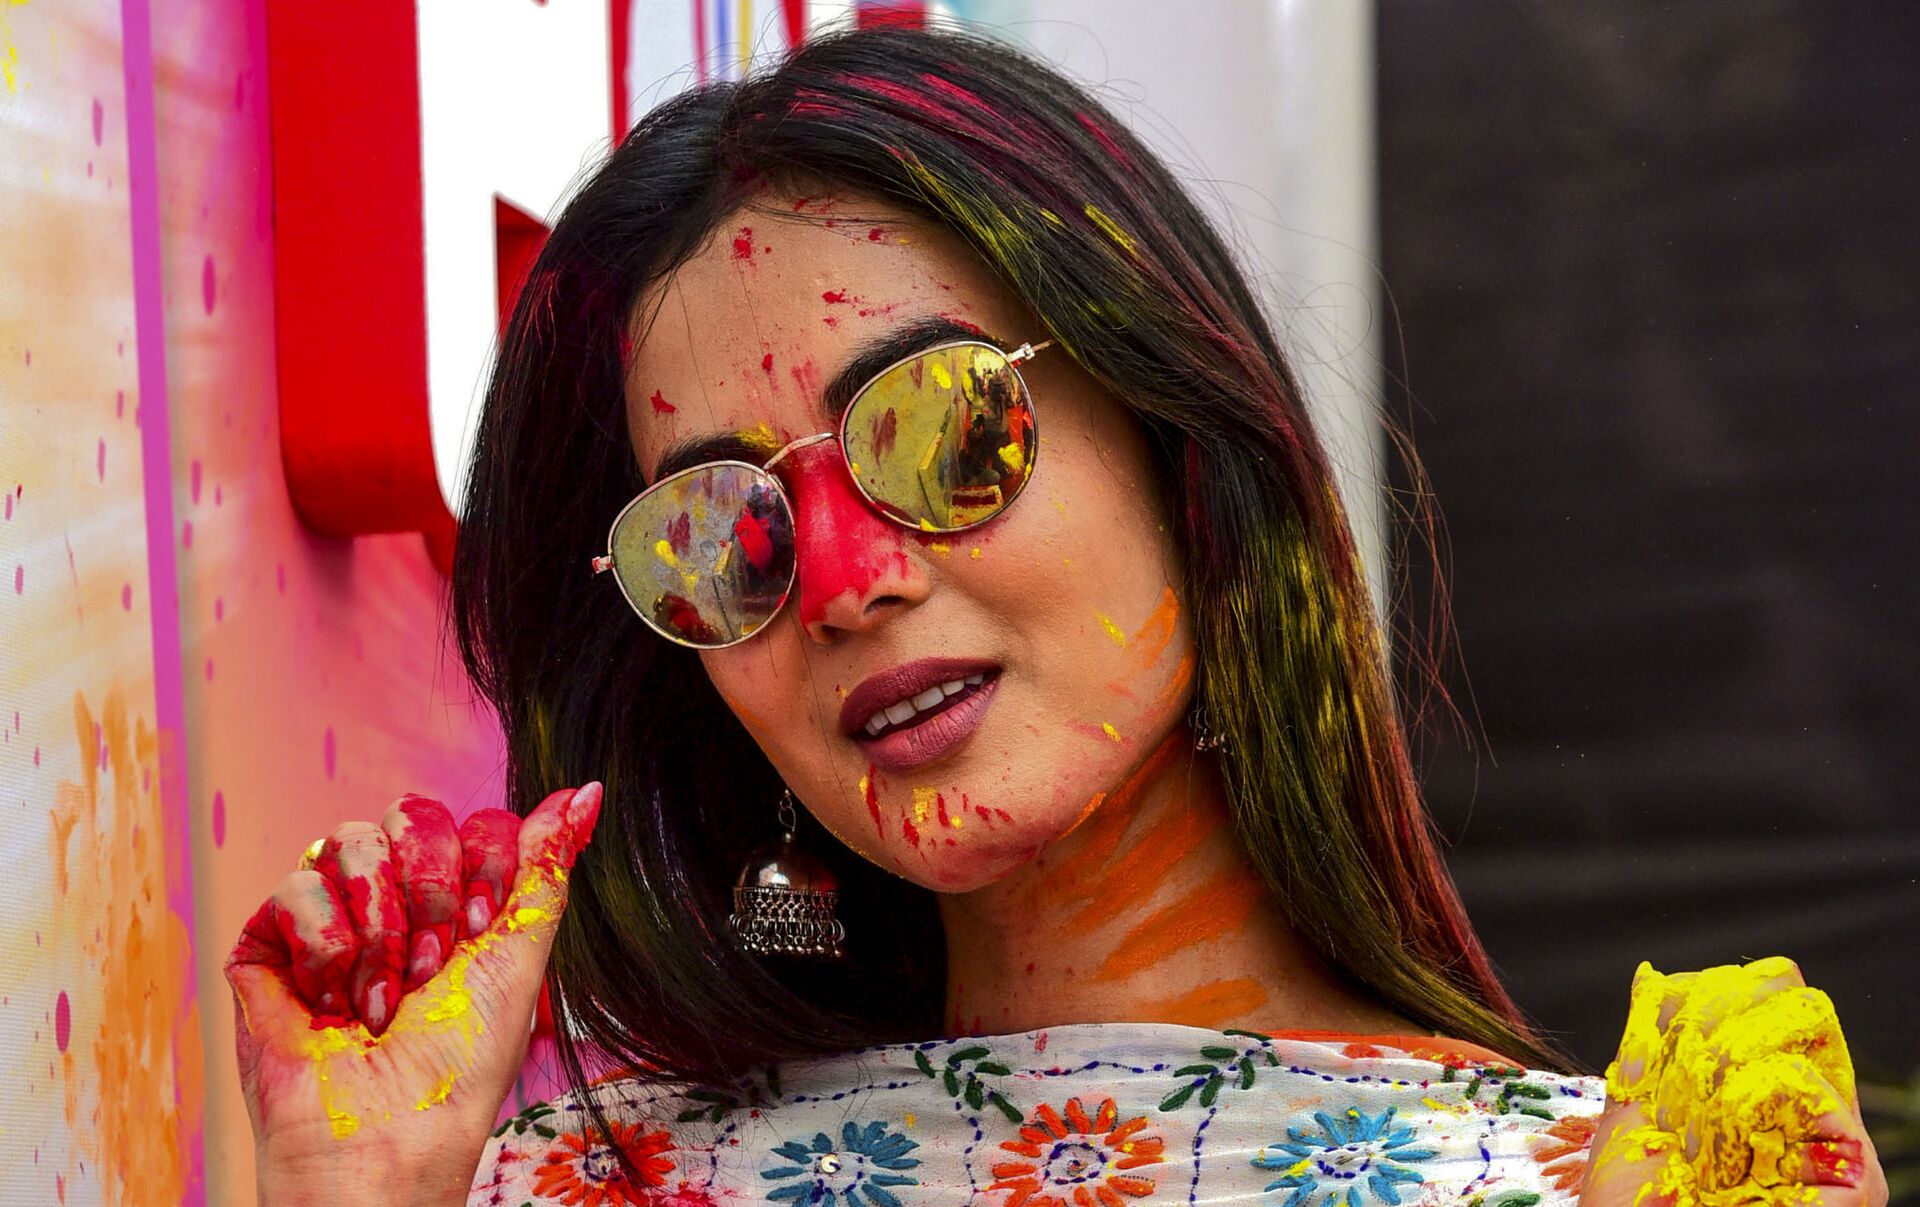 Holi Festival Portraits Photos and Images | Shutterstock